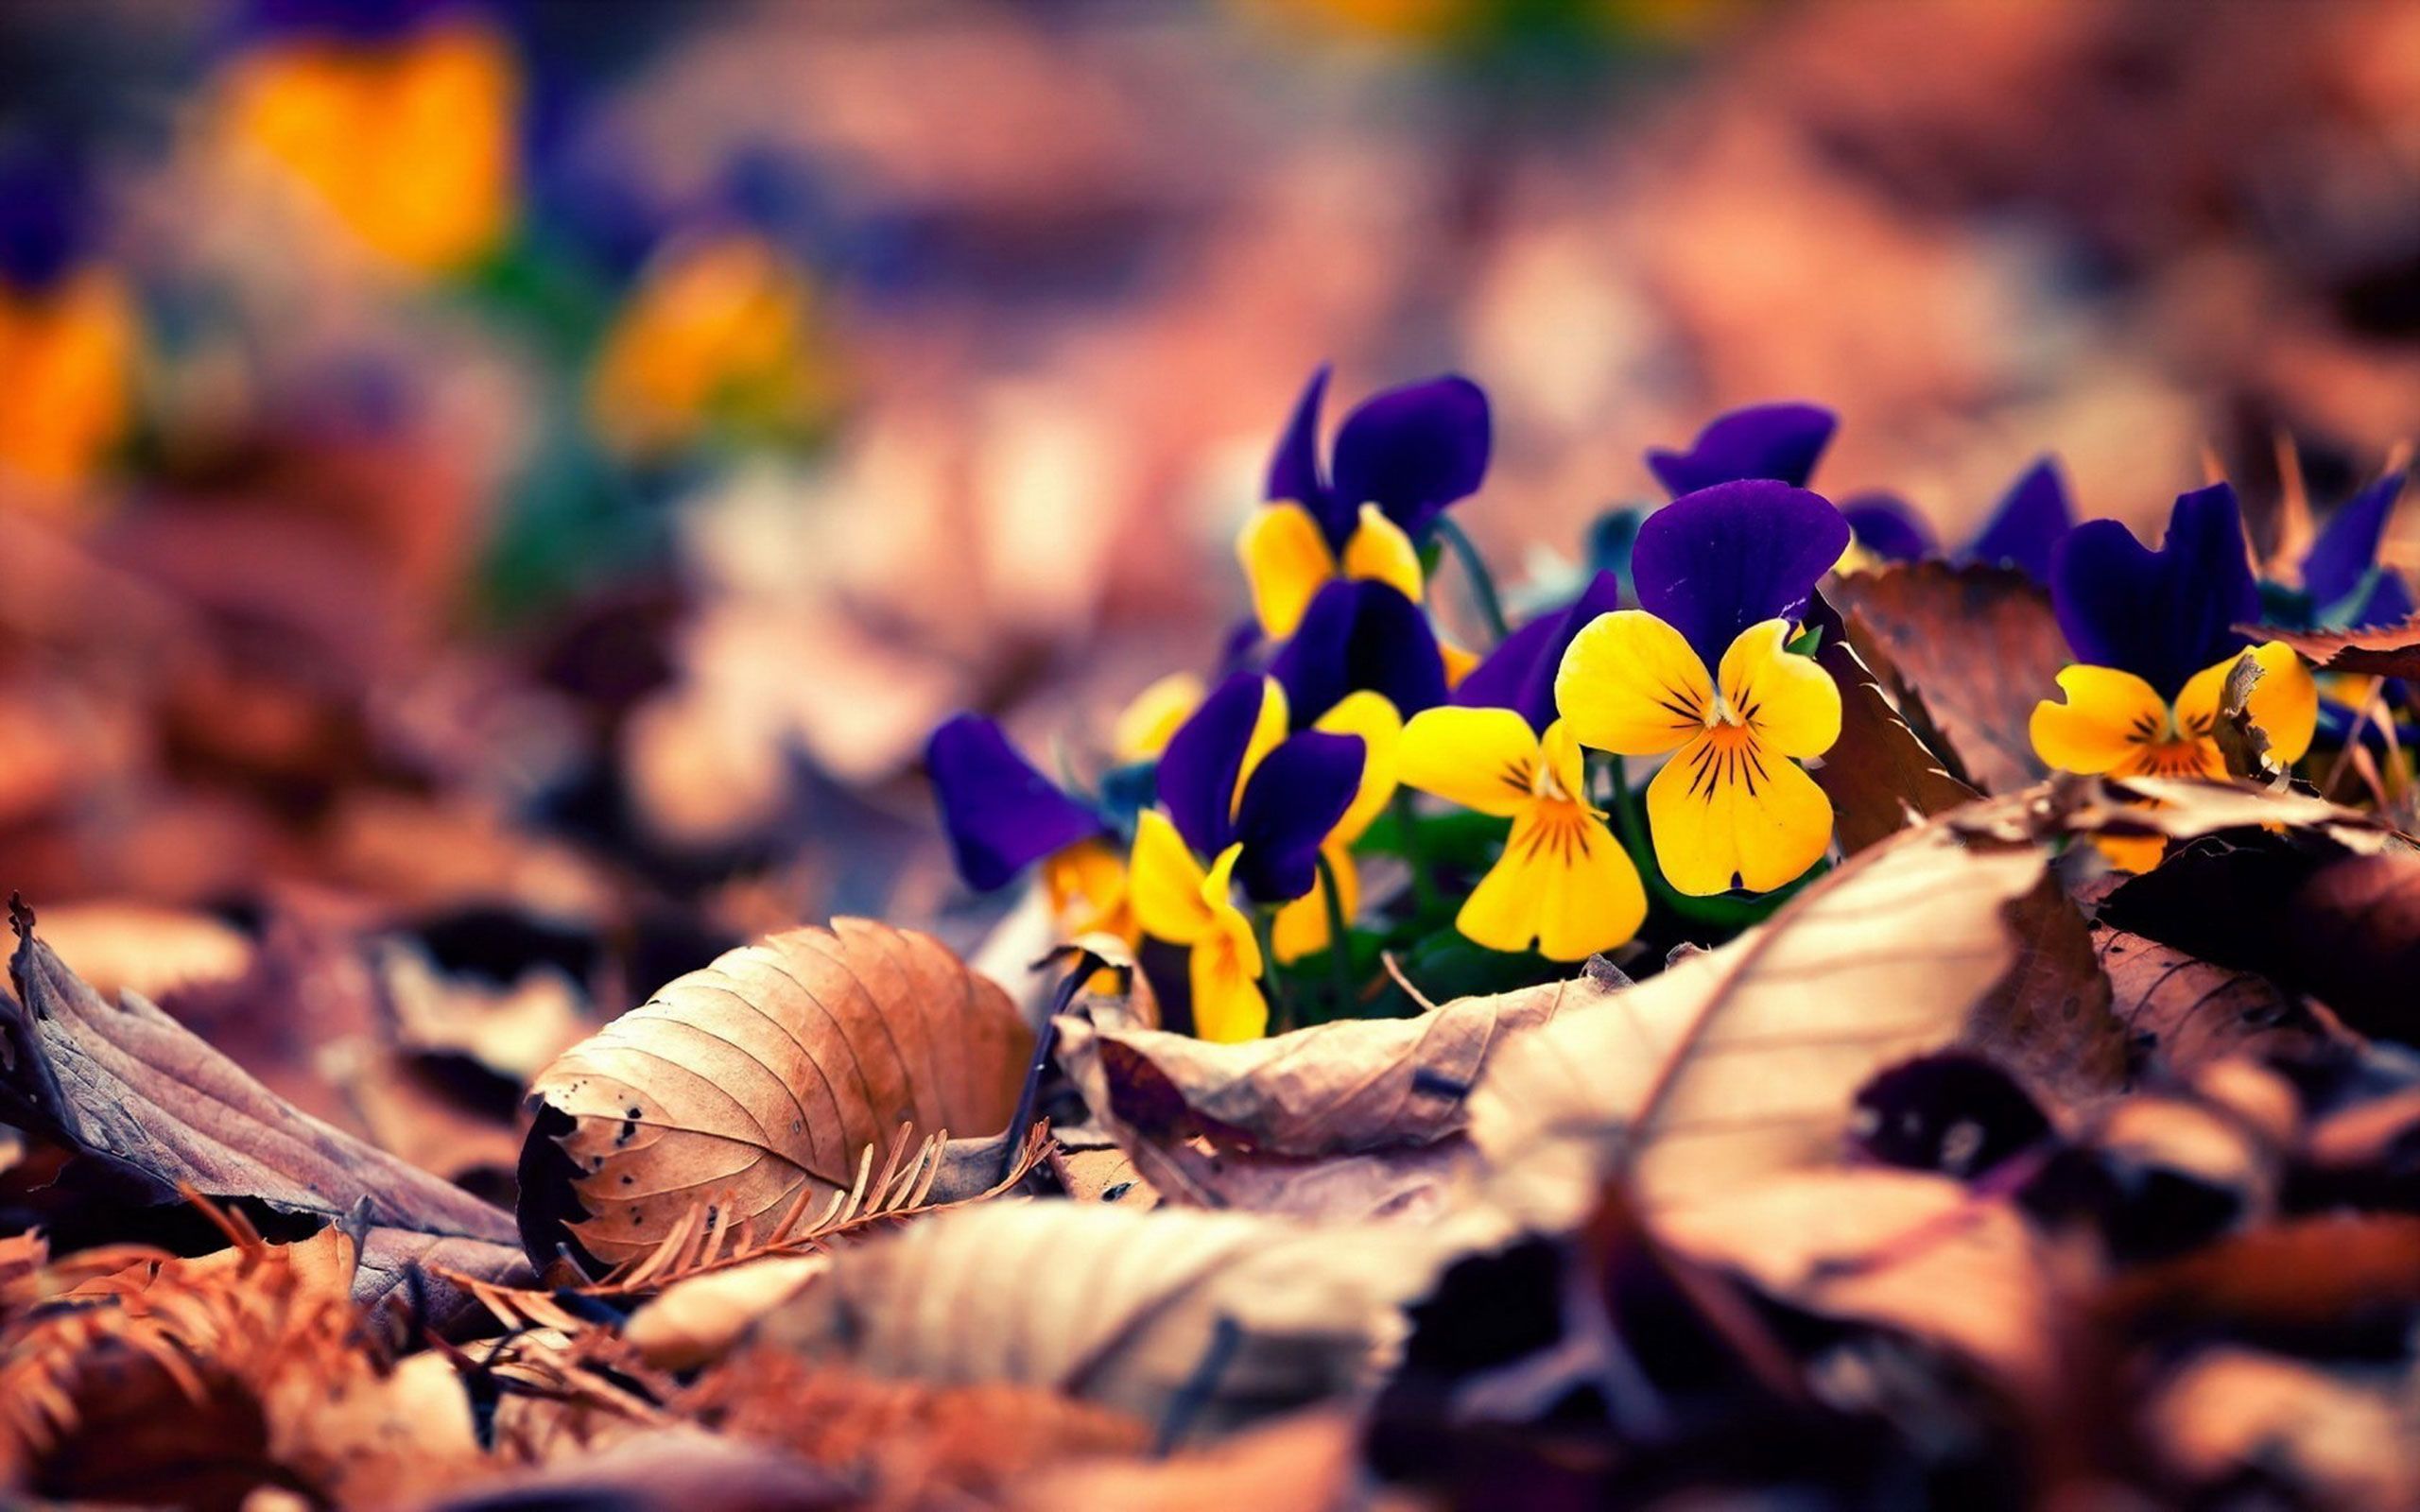 10 Outstanding spring desktop backgrounds for windows 10 You Can Use It ...